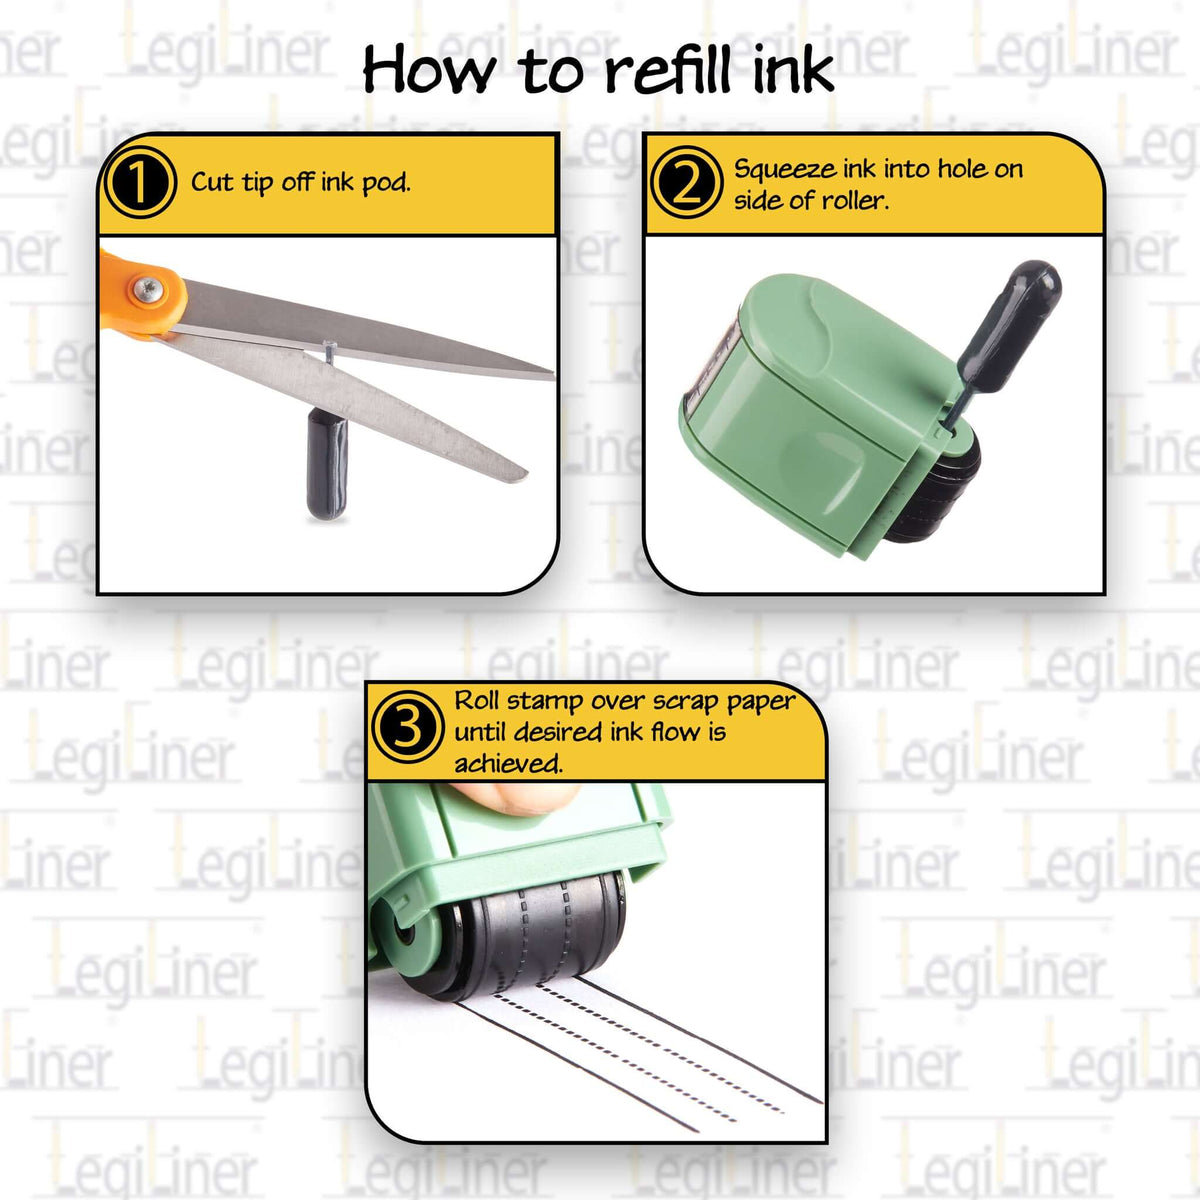 How to refill the ink of LegiLiner Self Inking Teacher Stamp 18mm